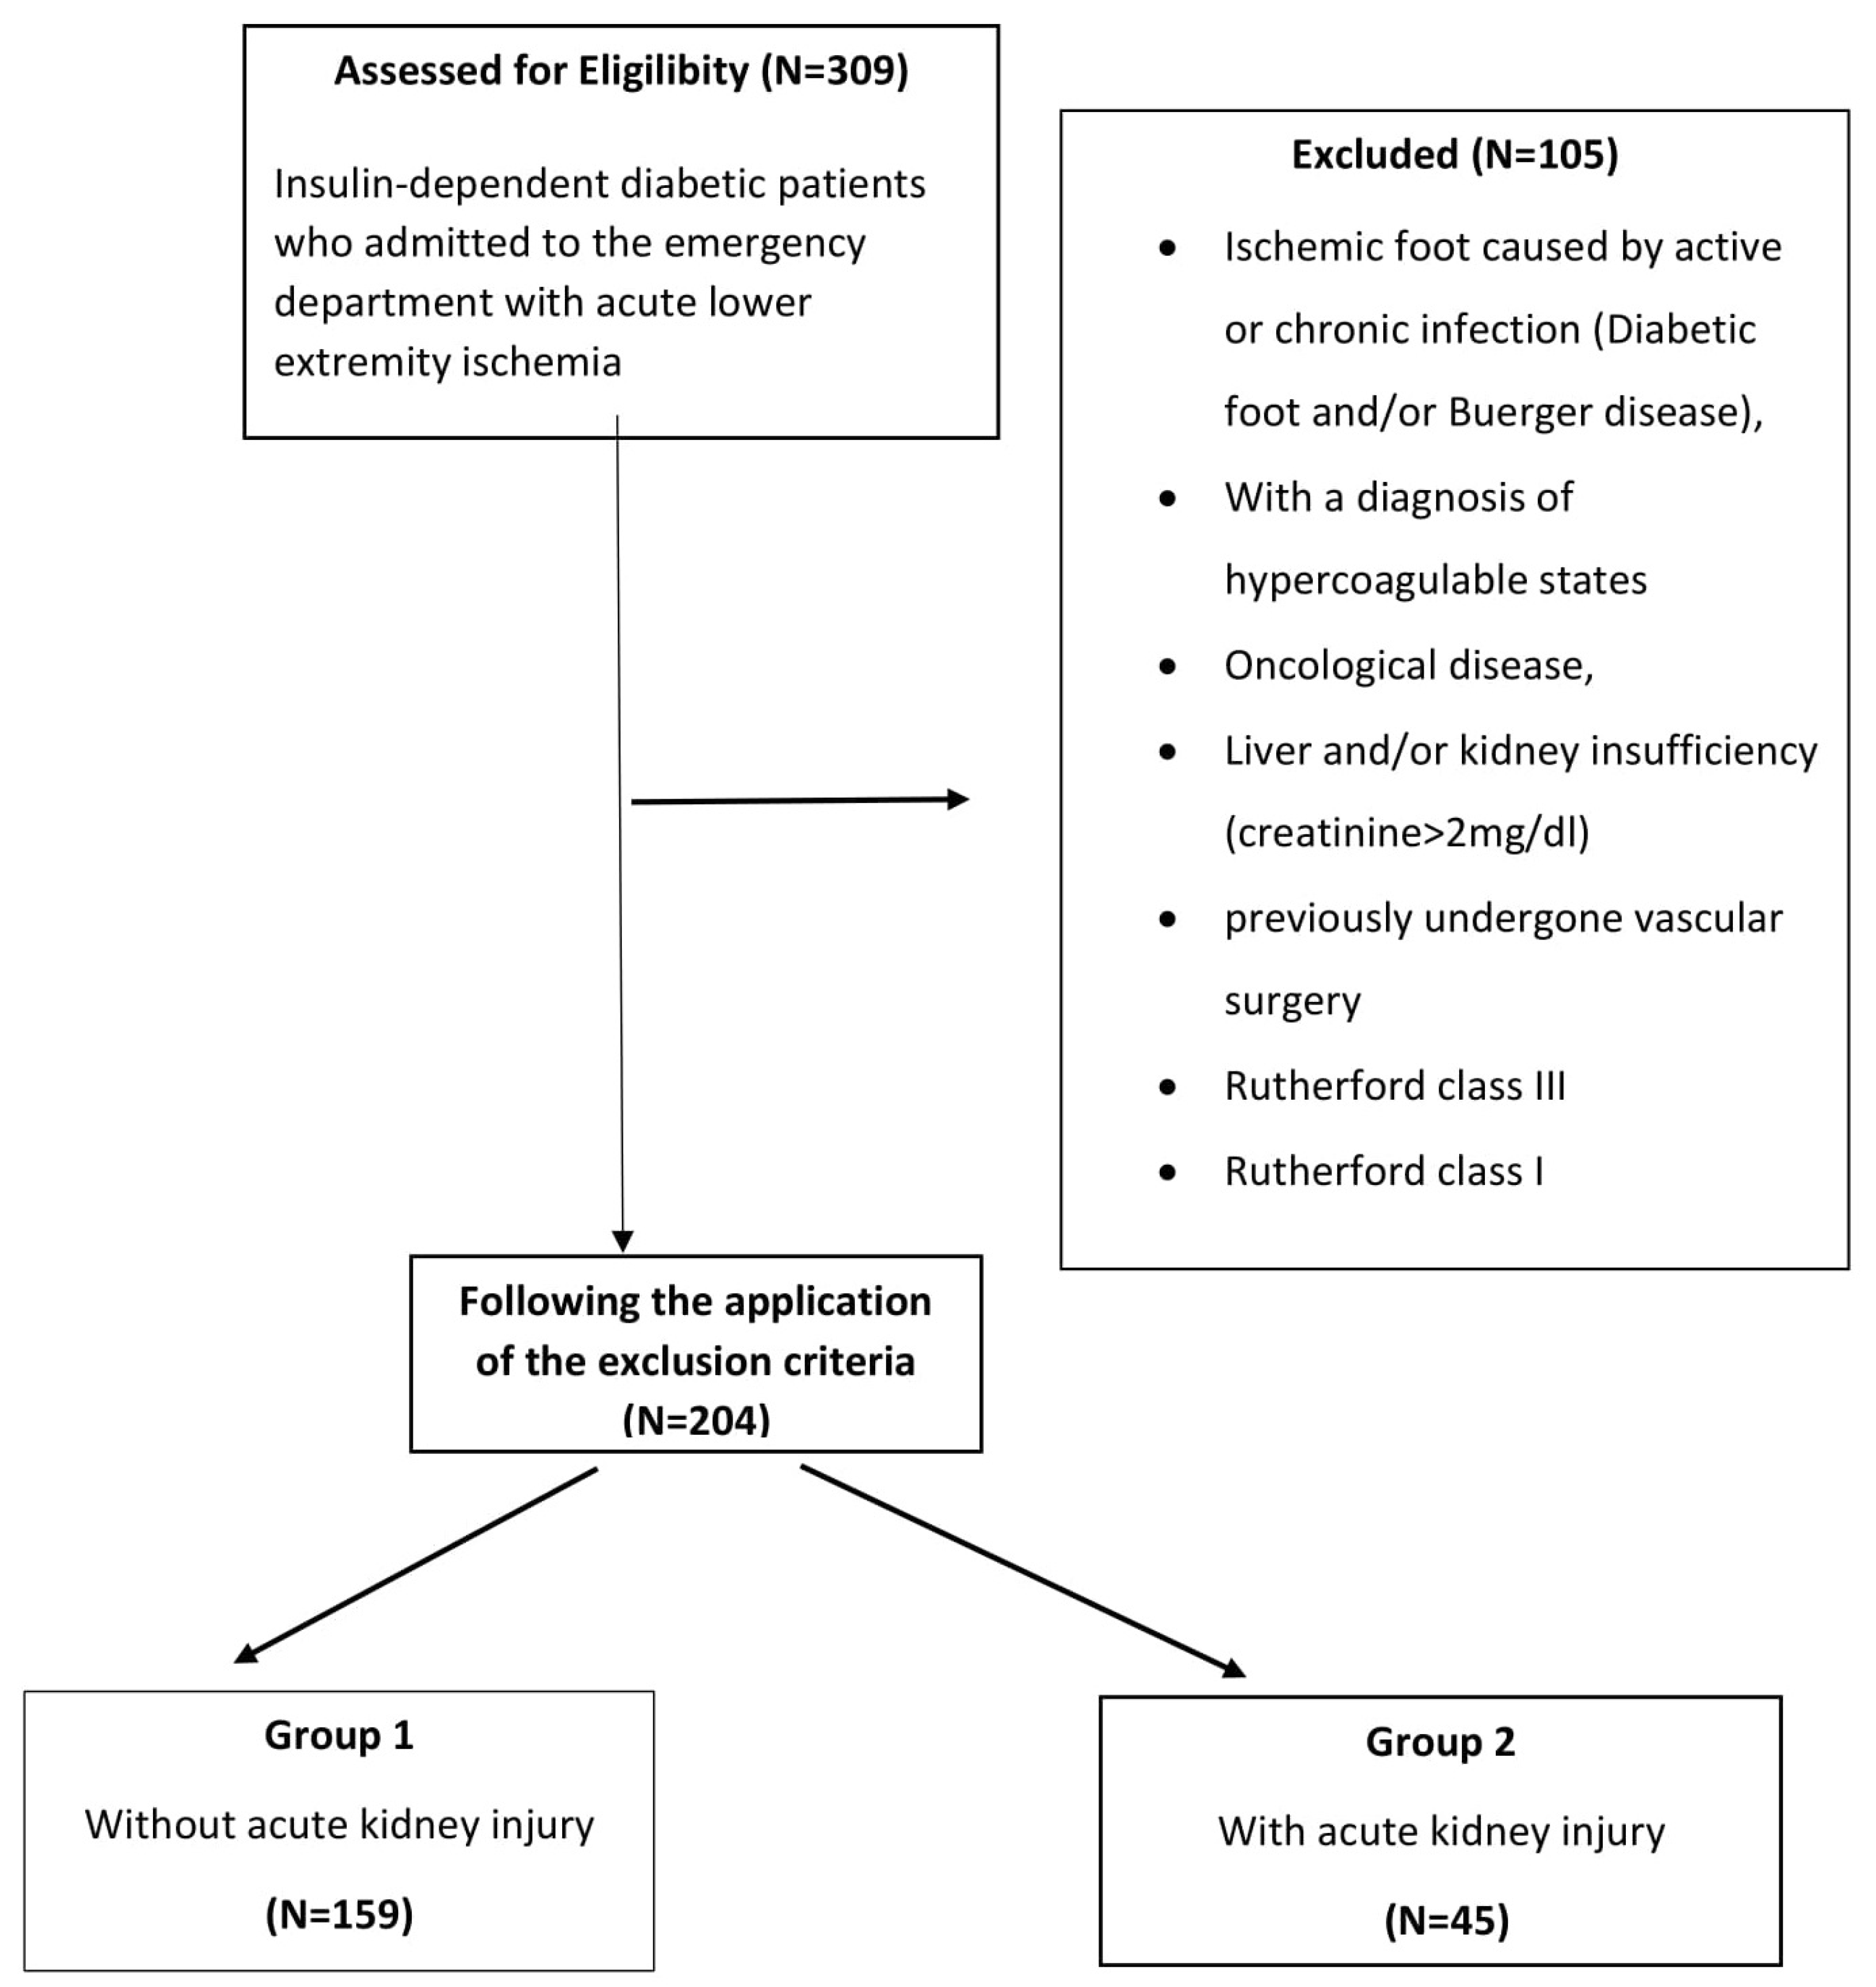 Tomography Free Full-Text Investigation of the Effects of Stress Hyperglycemia Ratio and Preoperative Computed Tomographic Angiography on the Occurrence of Acute Kidney Injury in Diabetic Patients following Surgical Thromboembolectomy